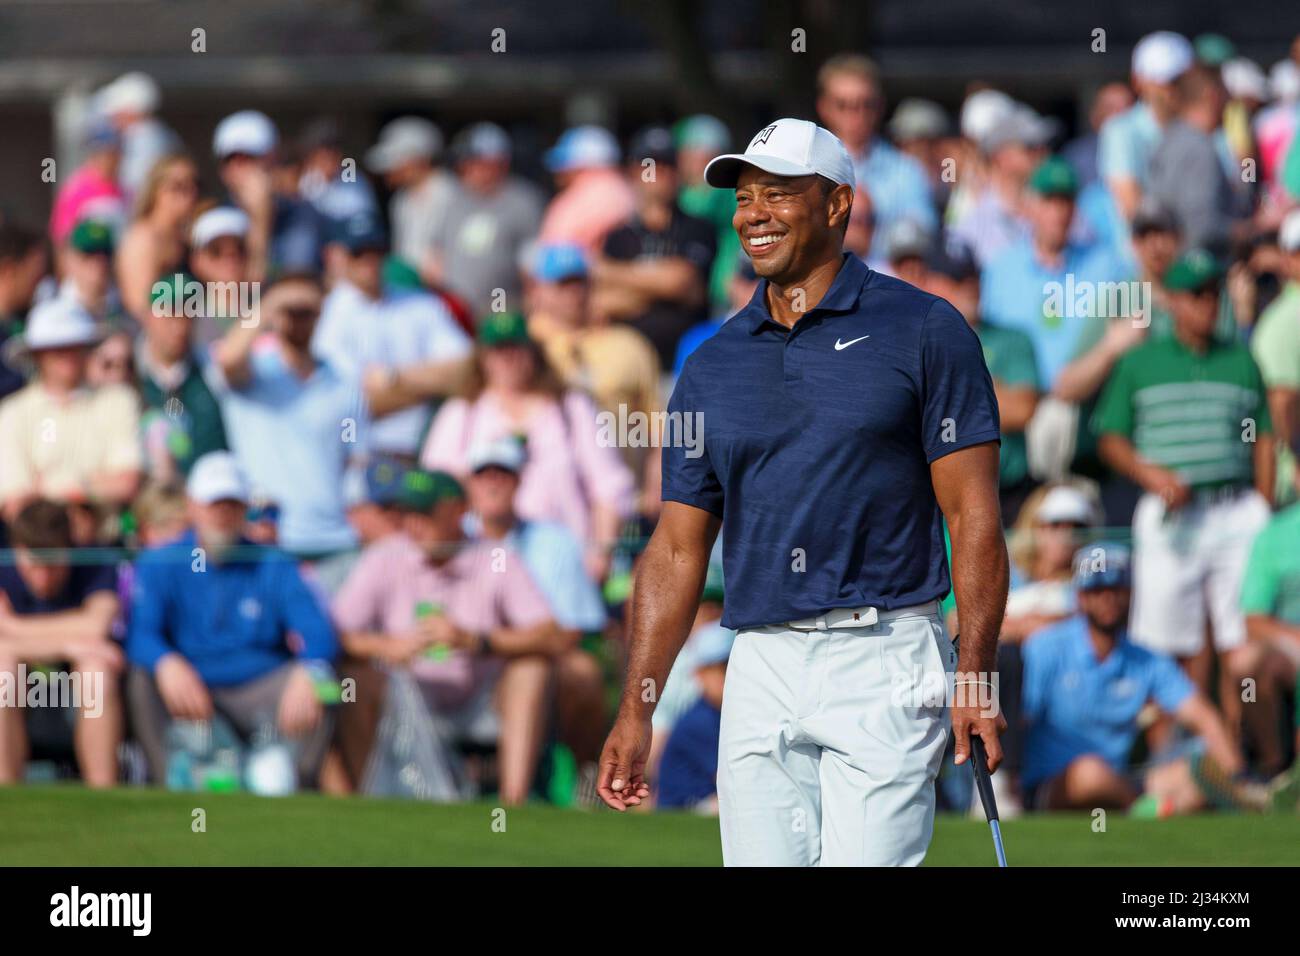 Augusta National Golf Club. 04th Apr, 2022. Tiger Woods smiles during a practice round of The Masters golf tournament at Augusta National Golf Club. Ryan Hunt/CSM/Alamy Live News Stock Photo